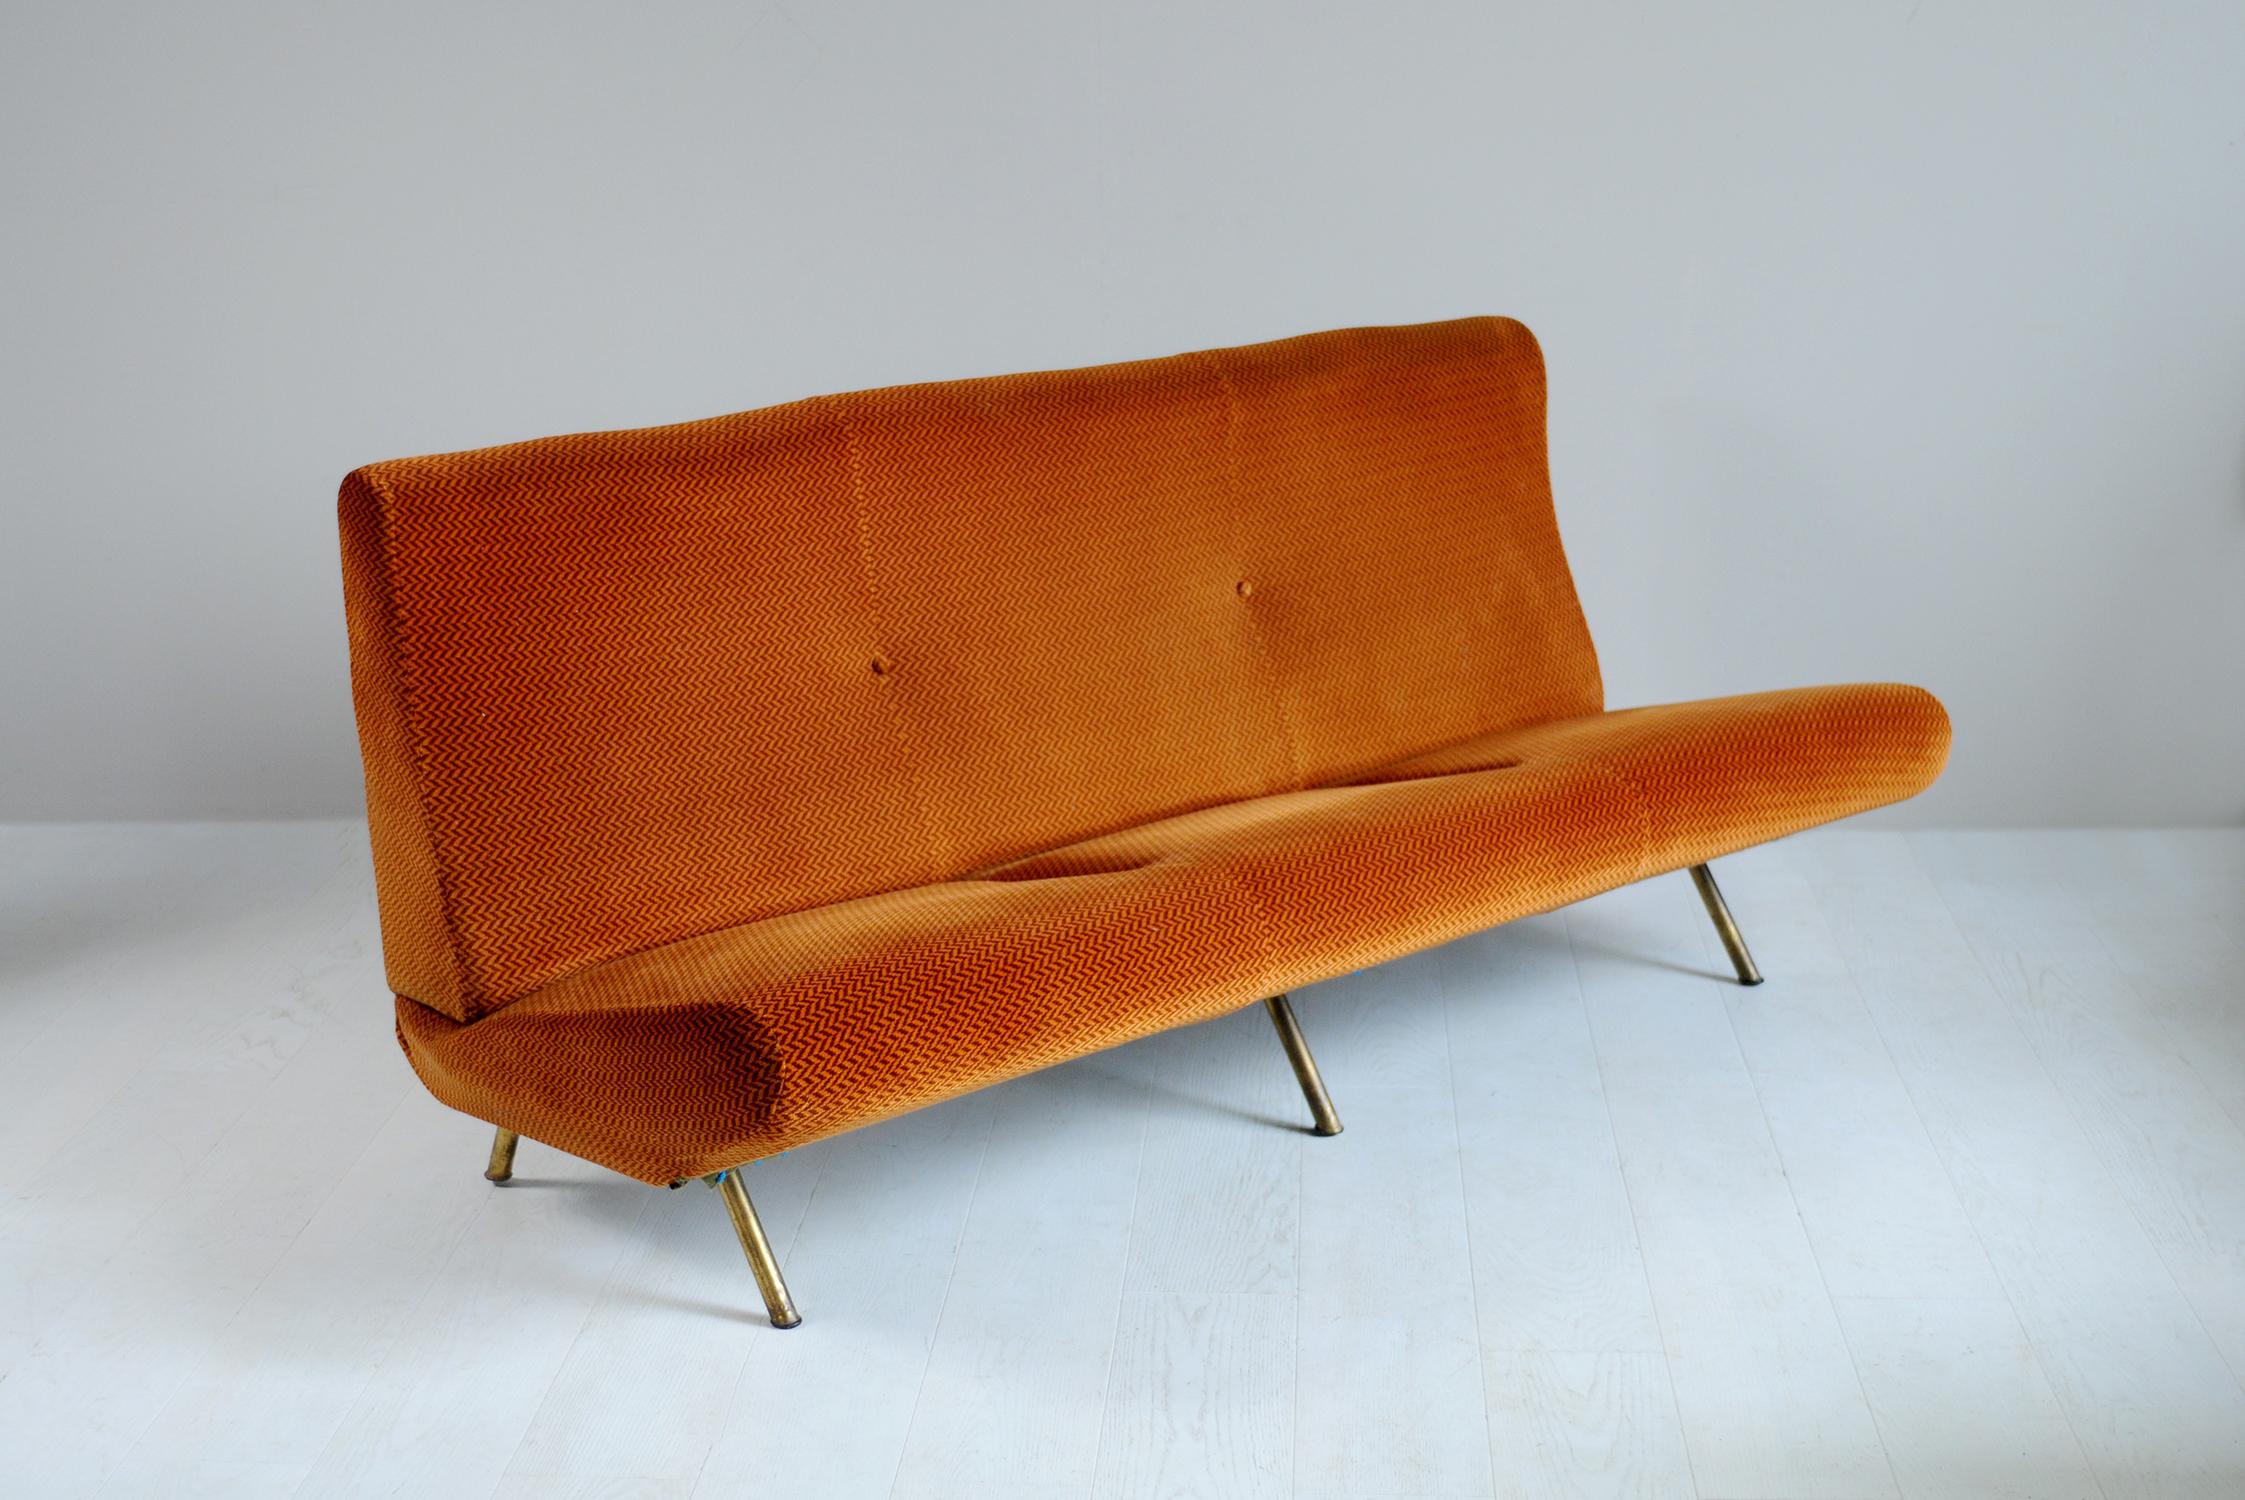 Set consisting of a 3-seat Triennale sofa and two lady armchairs created by Marco Zanuso for Arflex, Italy, 1951.
Upholstered in orange-red velvet with a chevron pattern, this set is in a remarkably fresh state.
Sofa dimensions: Length 182 cm /